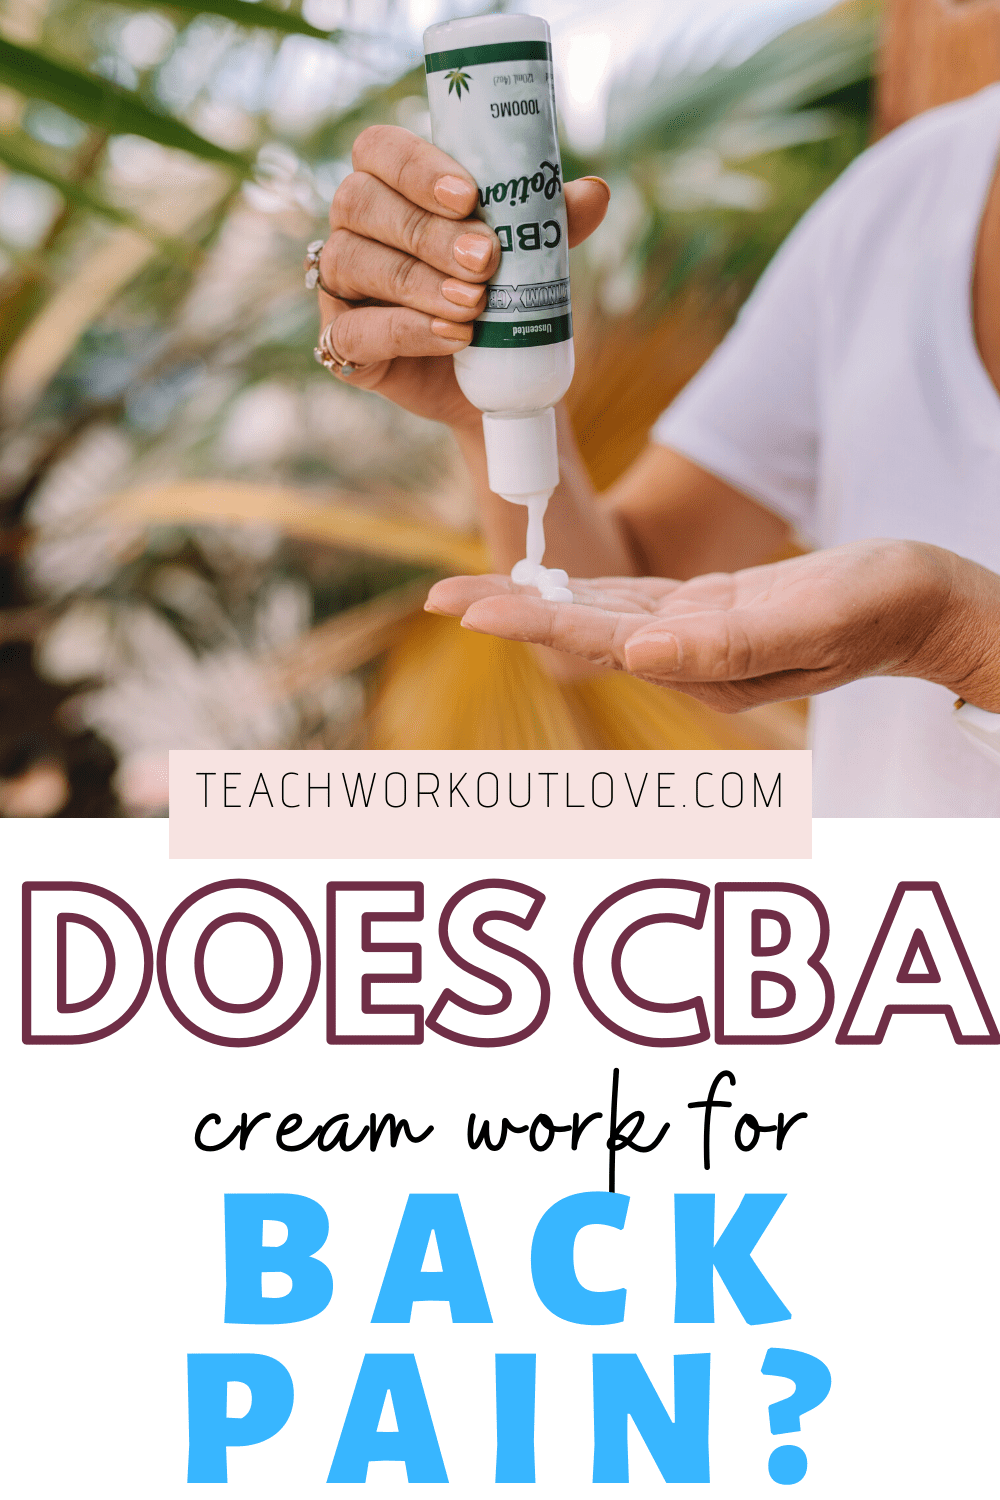 Back pain is a very common area of pain, especially for people with tedious work. In this post, we'll shed light on how to treat back pain with CBD cream.